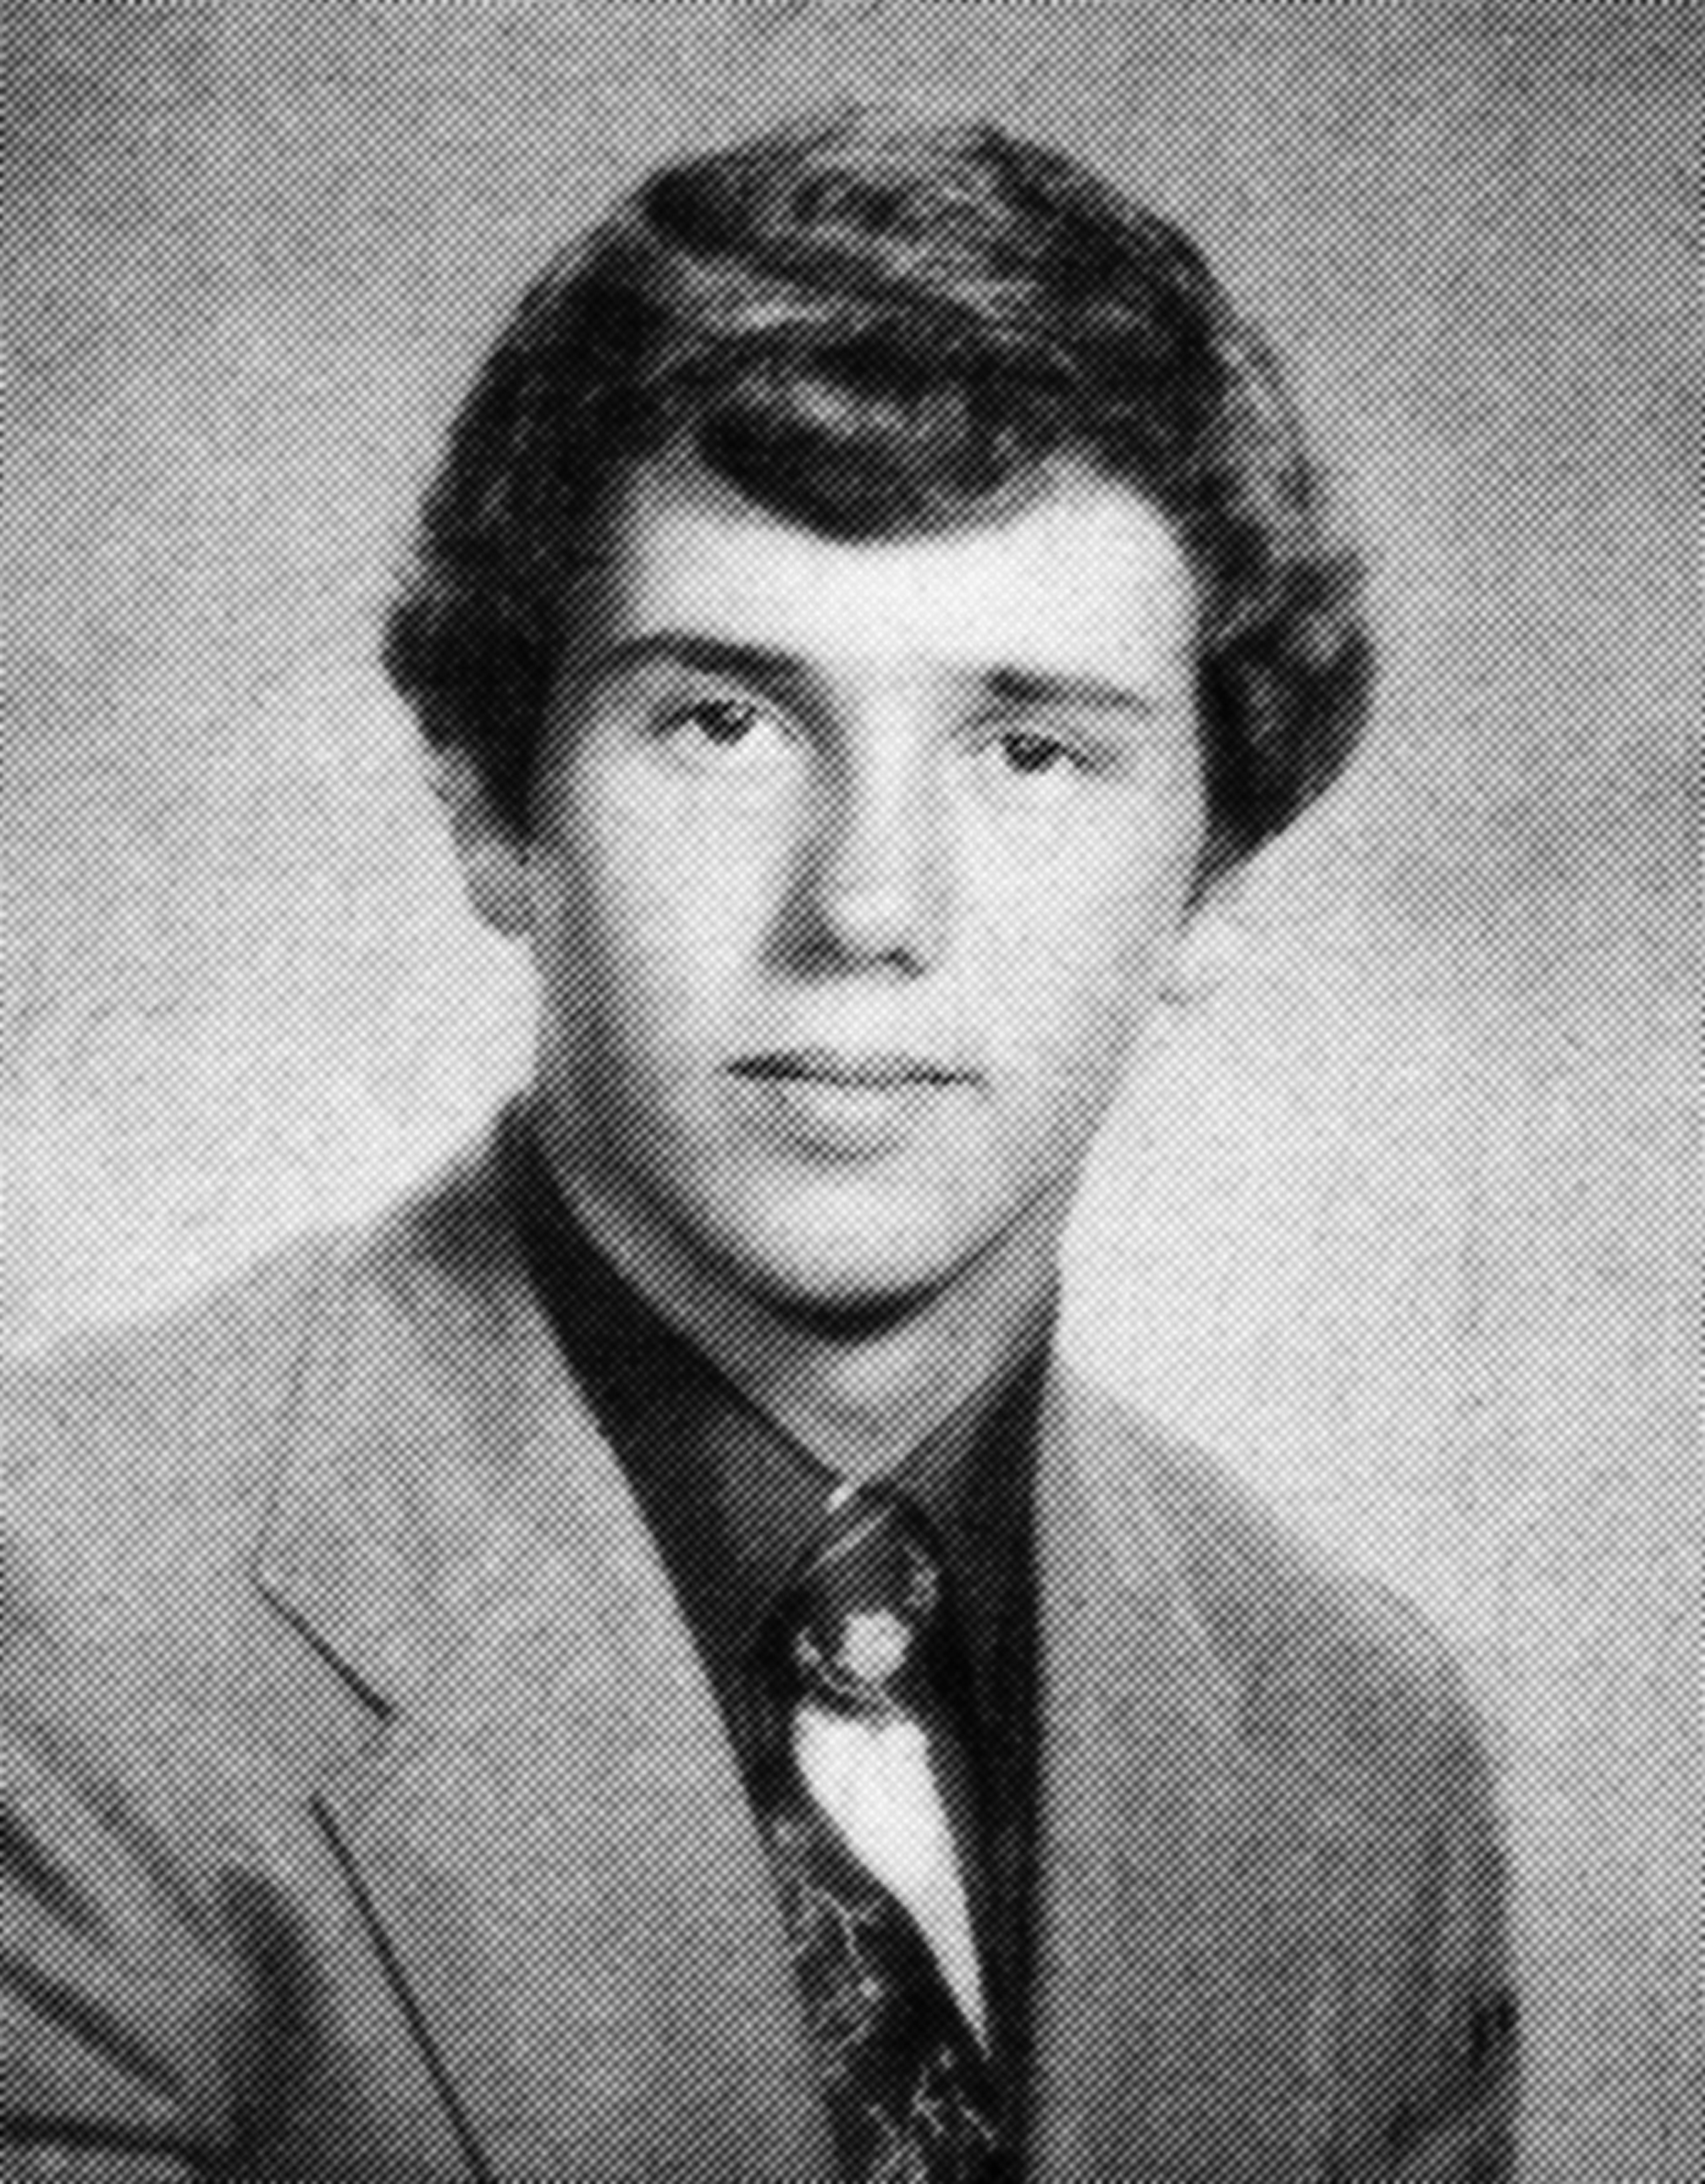 Mike Pence in his senior yearbook photo at
                              Columbus North High School in Columbus, OH in 1977.